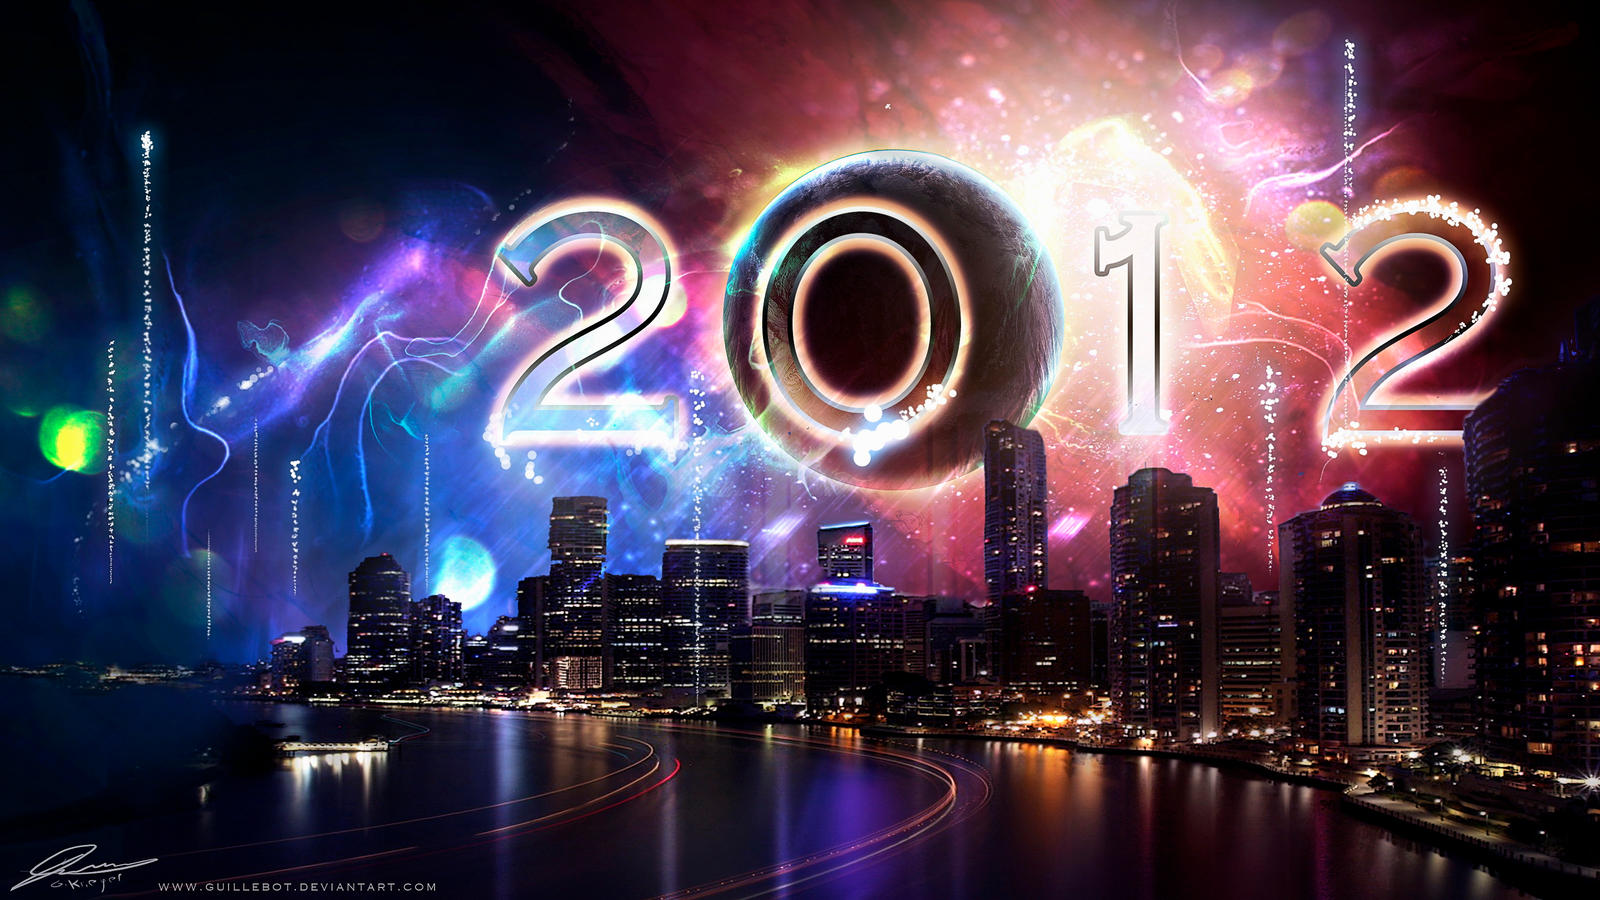 2012 New Year by *GuilleBot on deviantART